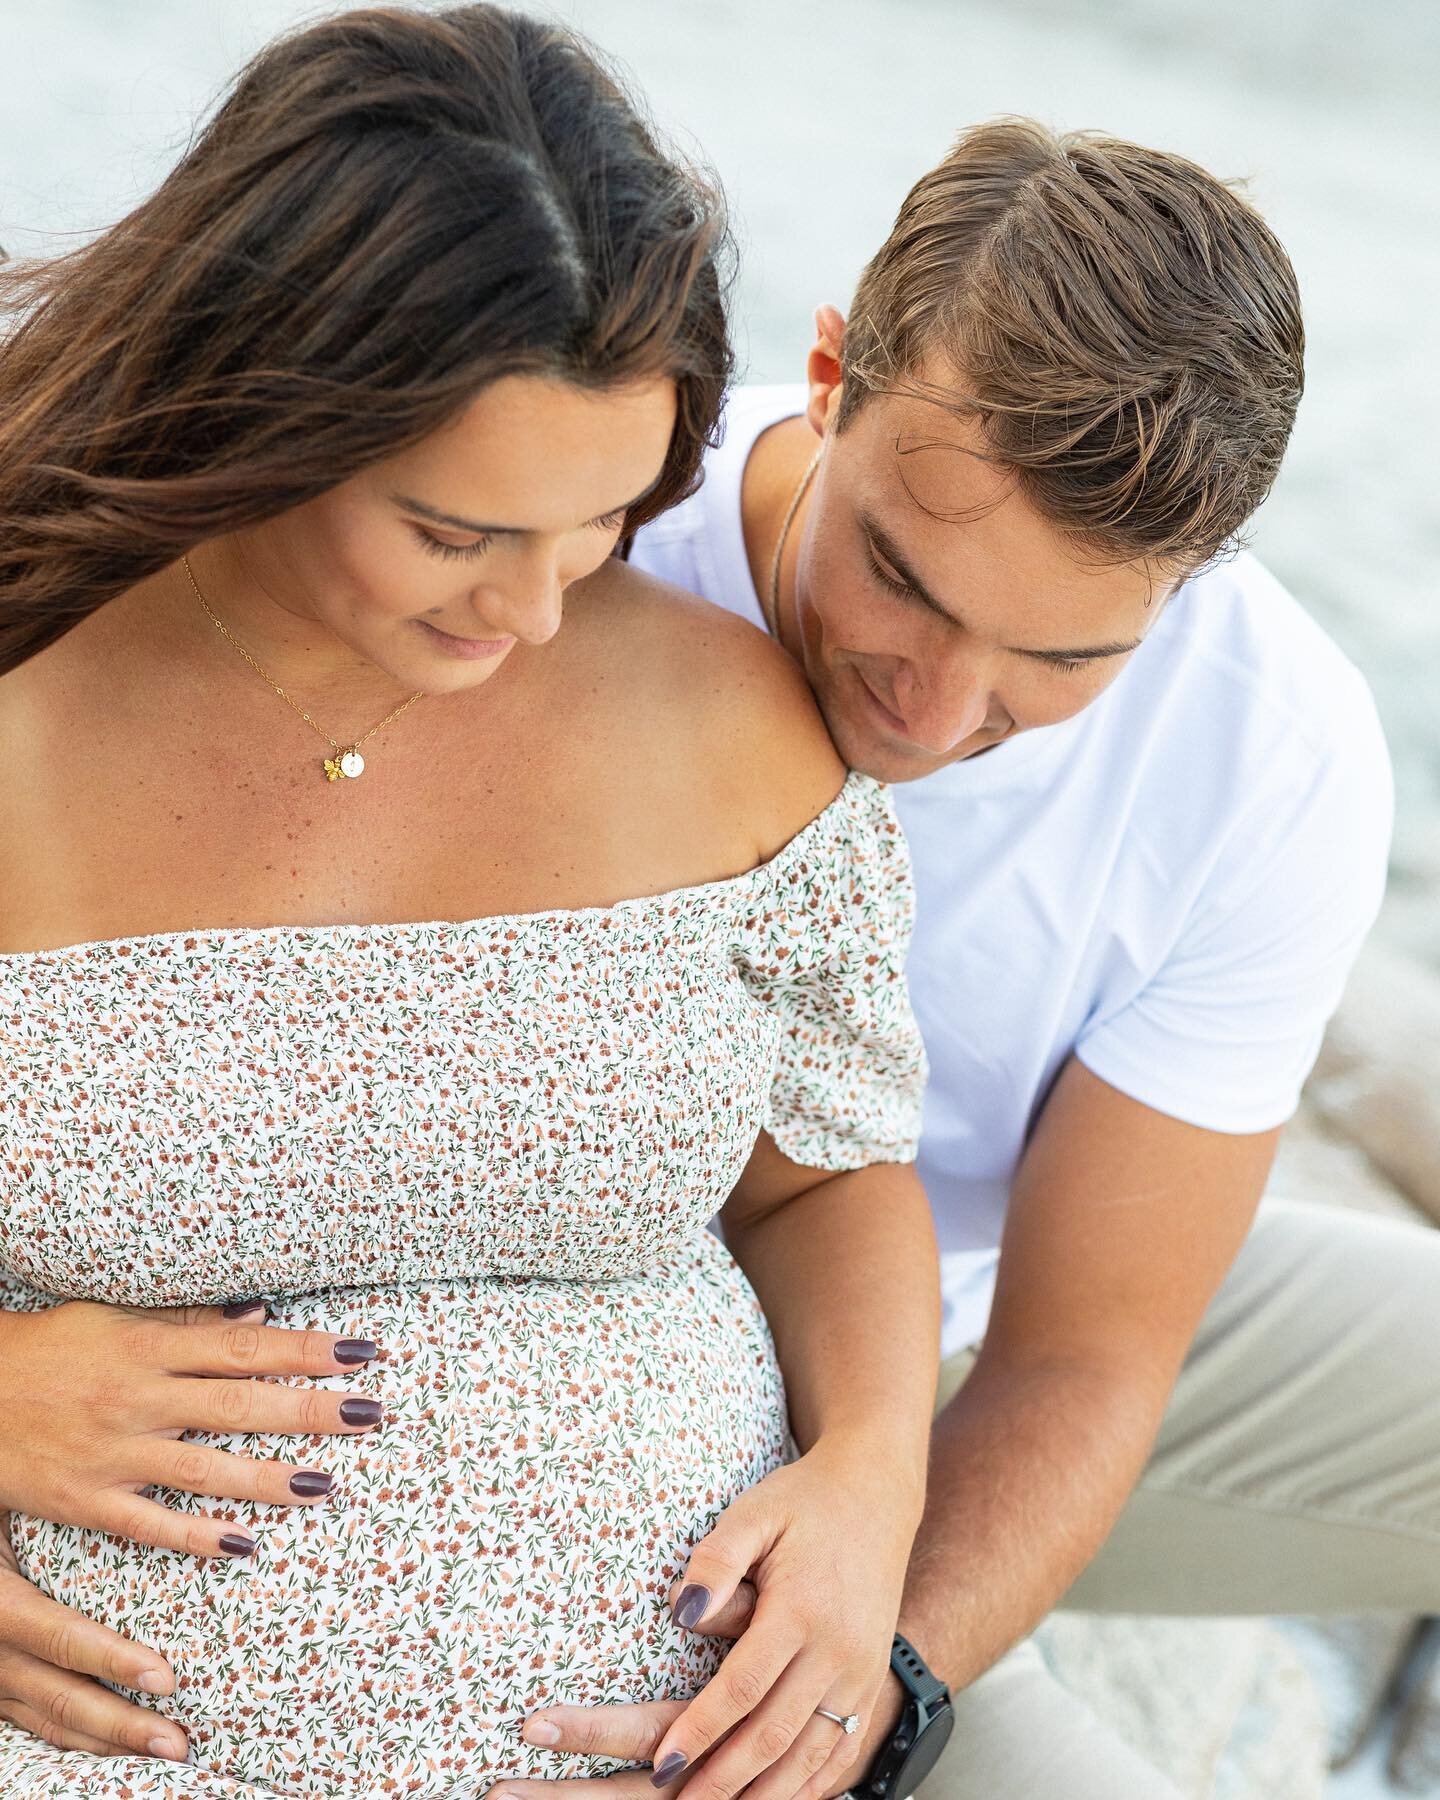 I know it&rsquo;s October but I needed to have this maternity beach session on my grid 😍 So excited for these two to become parents! 
.
.
.
.
.
.
.
#newhampshirenewbornphotographer 
#nhmaternityphotographer #mamaternityphotographer #newhampshirebaby